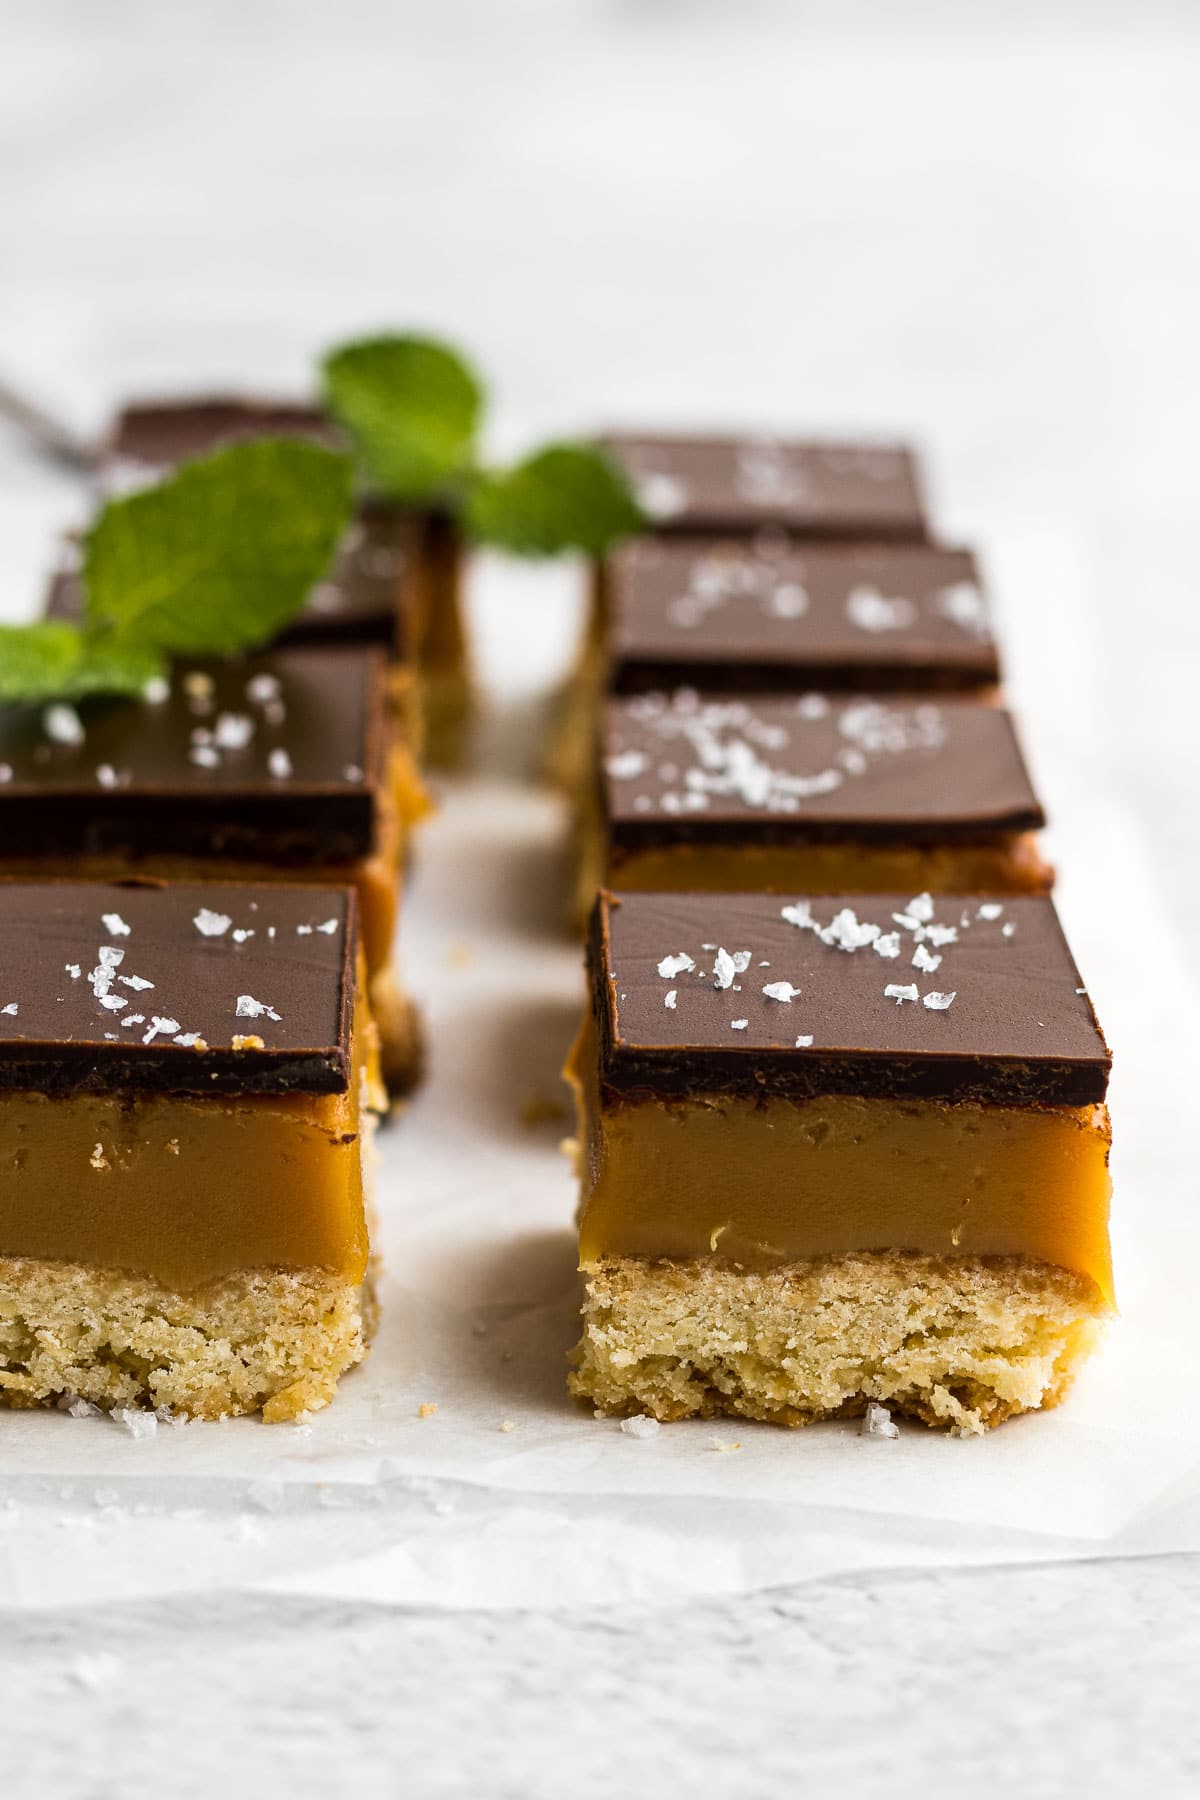 Peppermint crisp caramel slices lined up in a row to show the layers